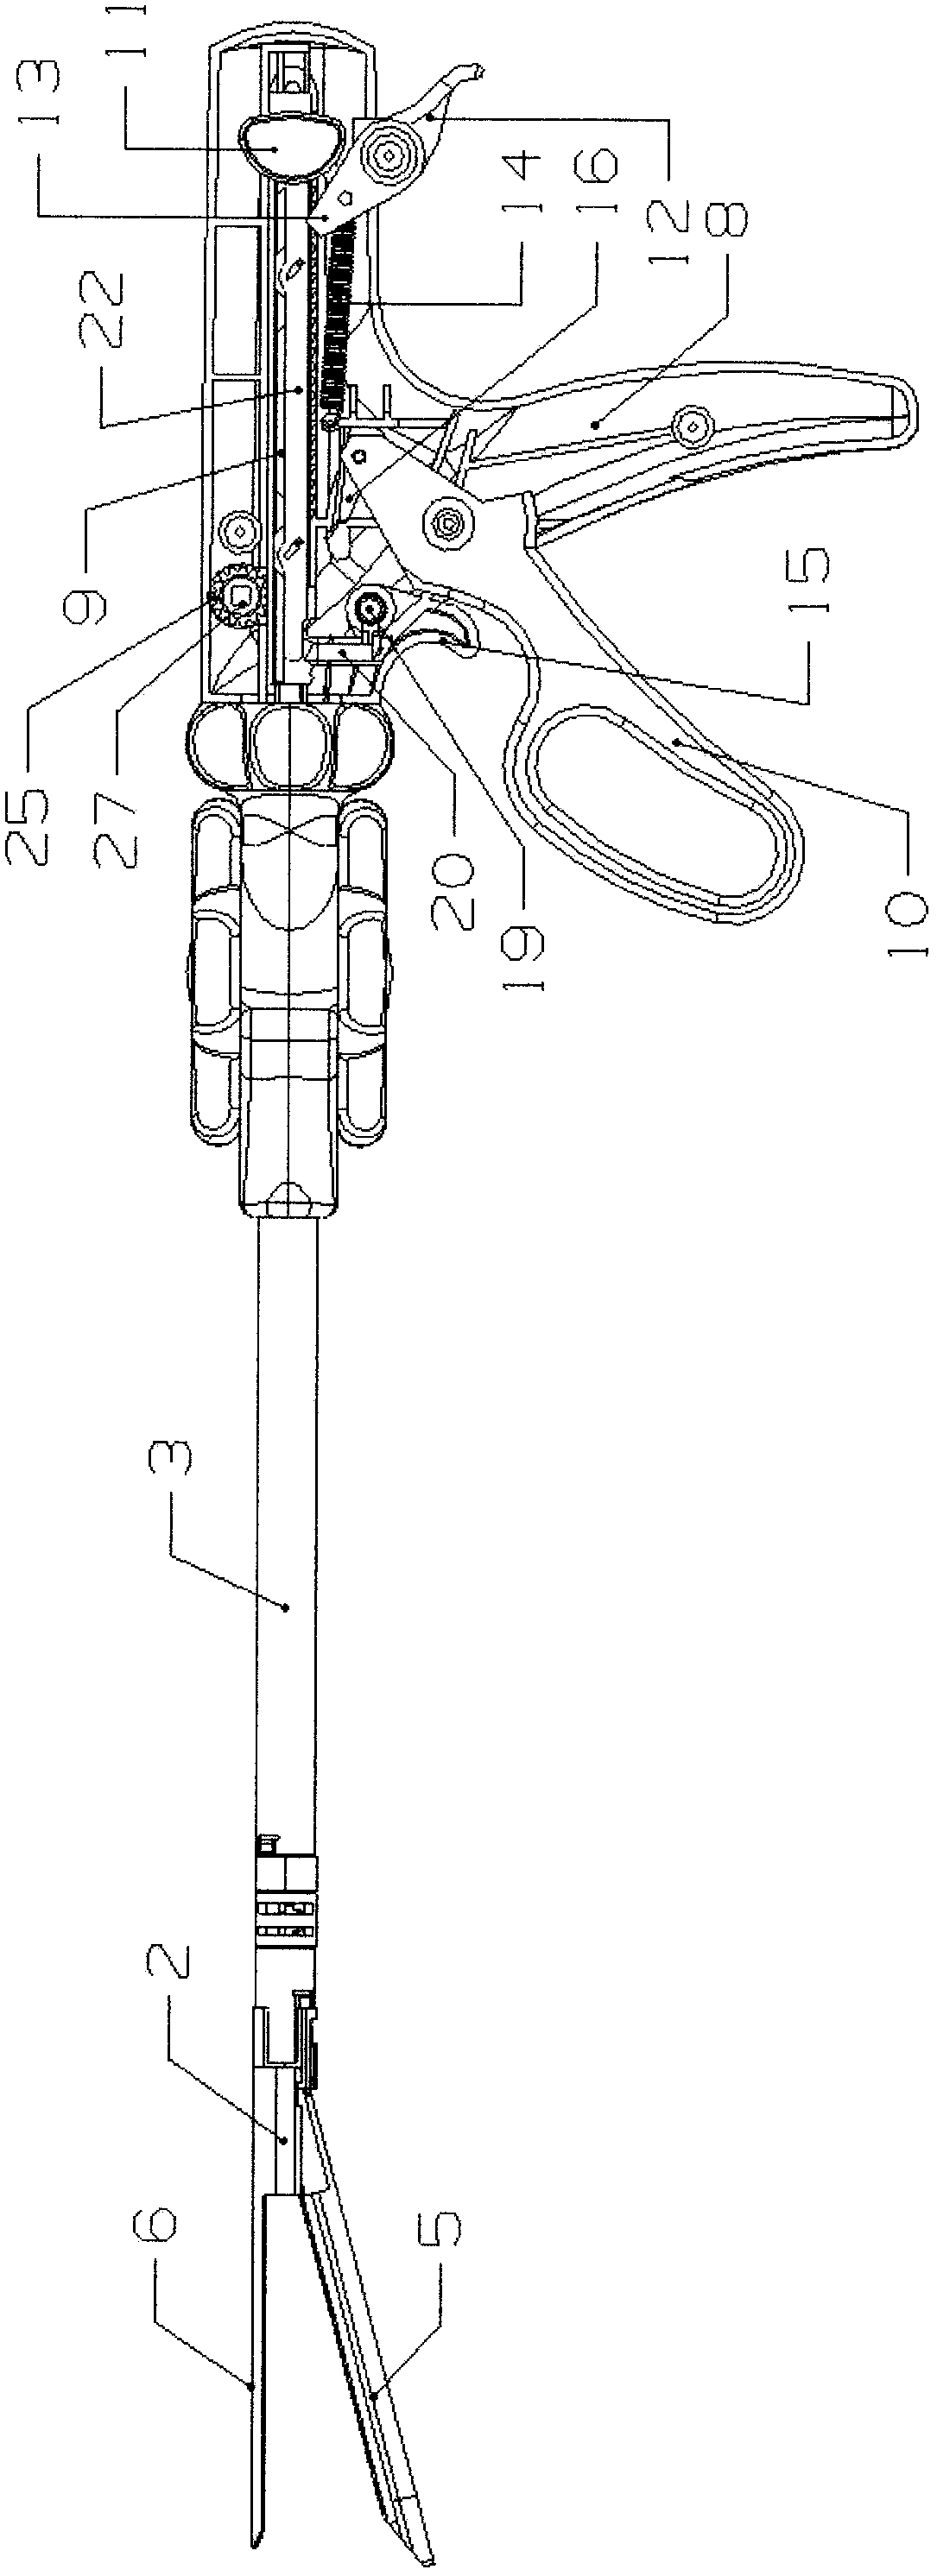 Opening and closing control mechanism of endoscopic surgical stapler